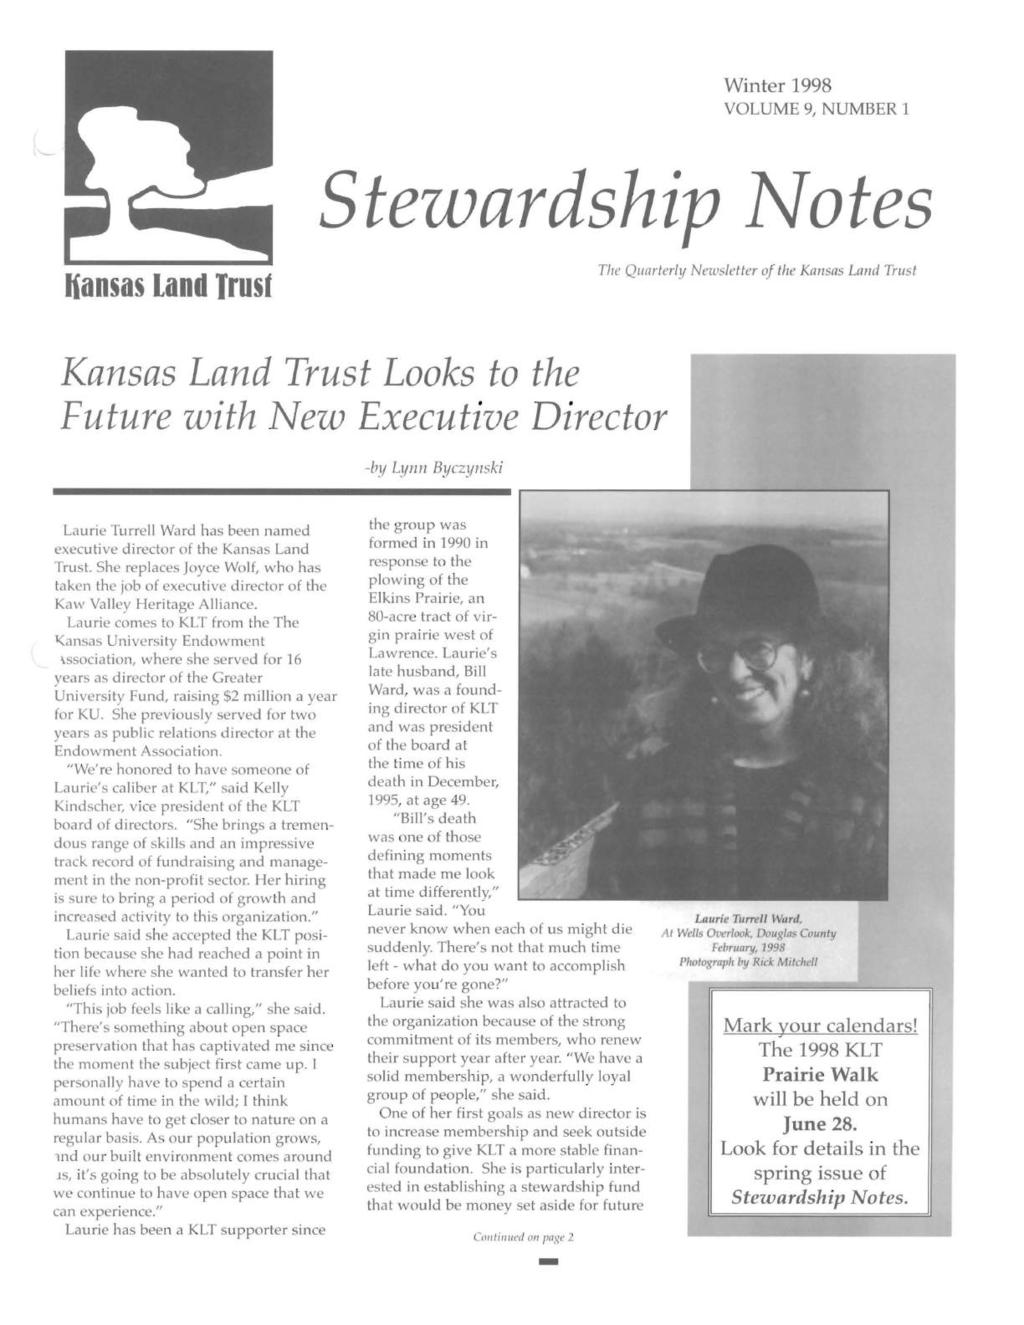 Winter 1998 VOLUME 9, NUMBER 1 Steuuardship ~otes liansas Land Trusf The Quarterly Newsletter of the Kansas Land Trust Kansas Land Trust Looks to the Future with New Executive Director -by Lynn